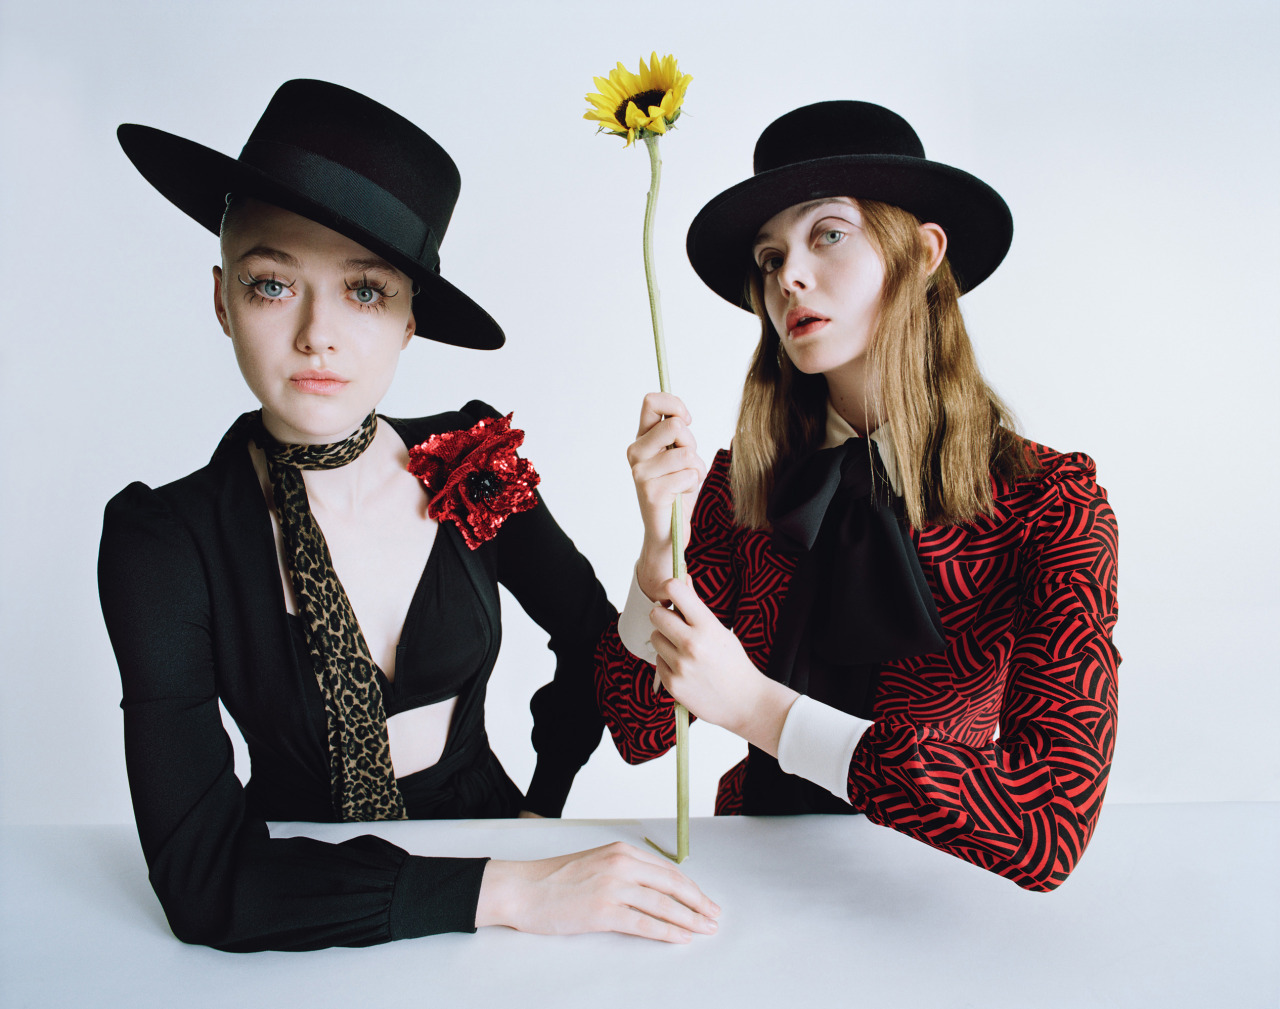 Surreal  Sisters
Photograph by Tim Walker; styled by Jacob K; W magazine February 2015. 